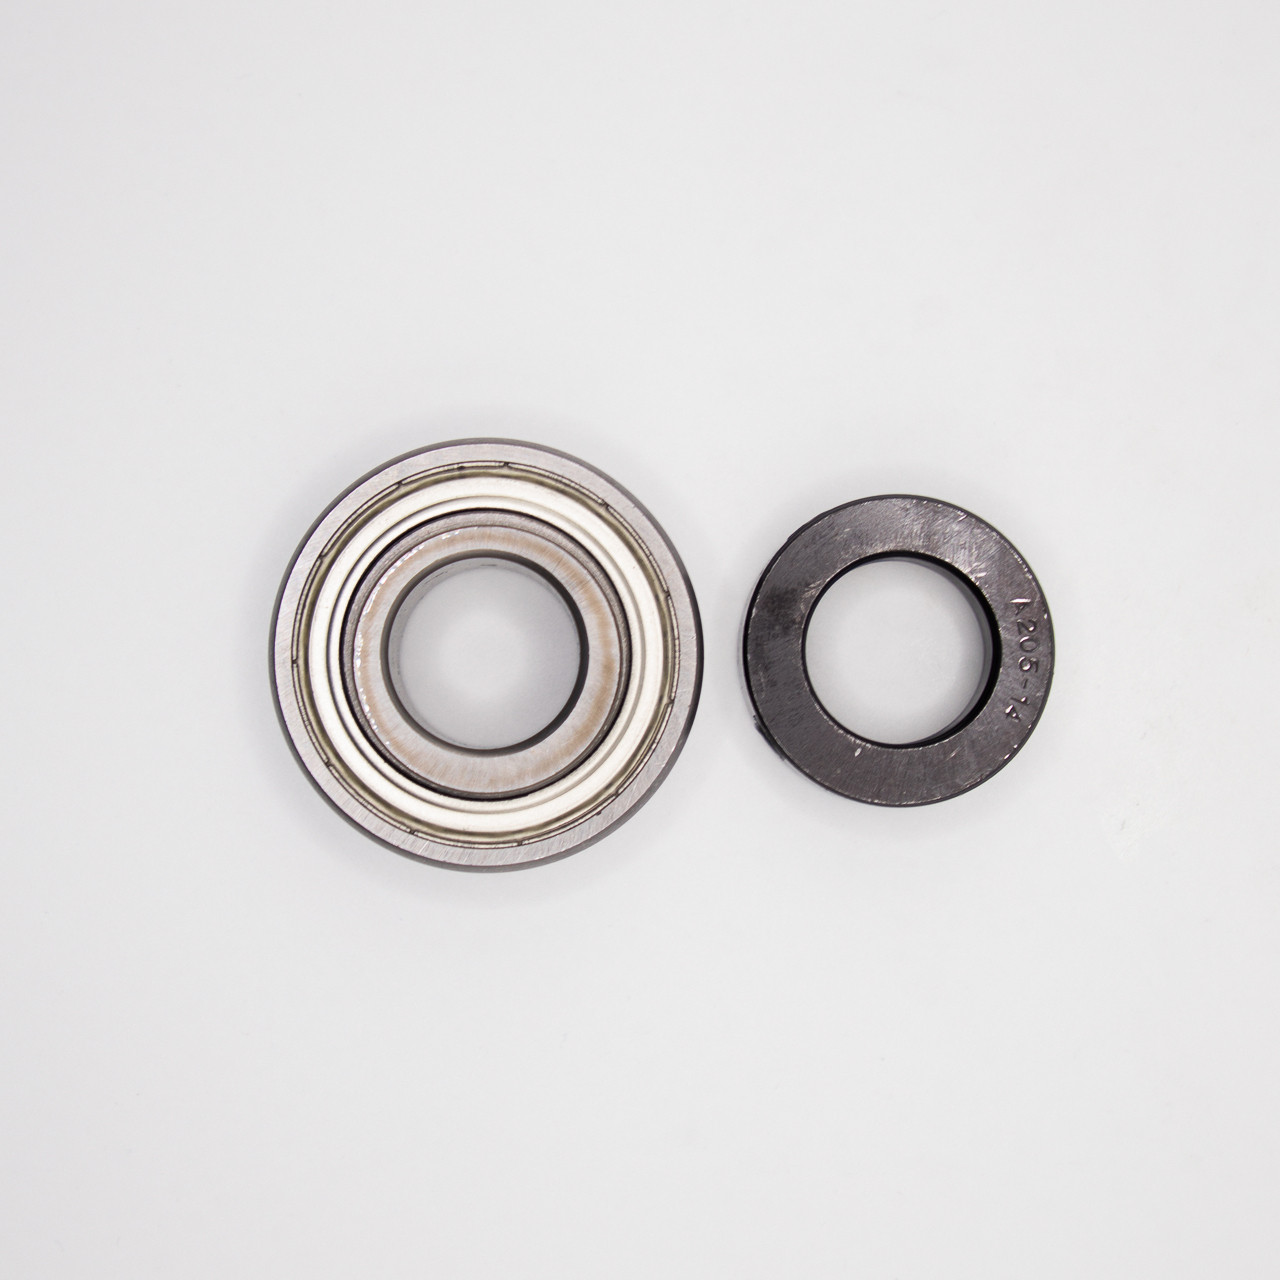 CSA205-15 Insert Ball Bearing 15/16x52x31.5 Separated Front View